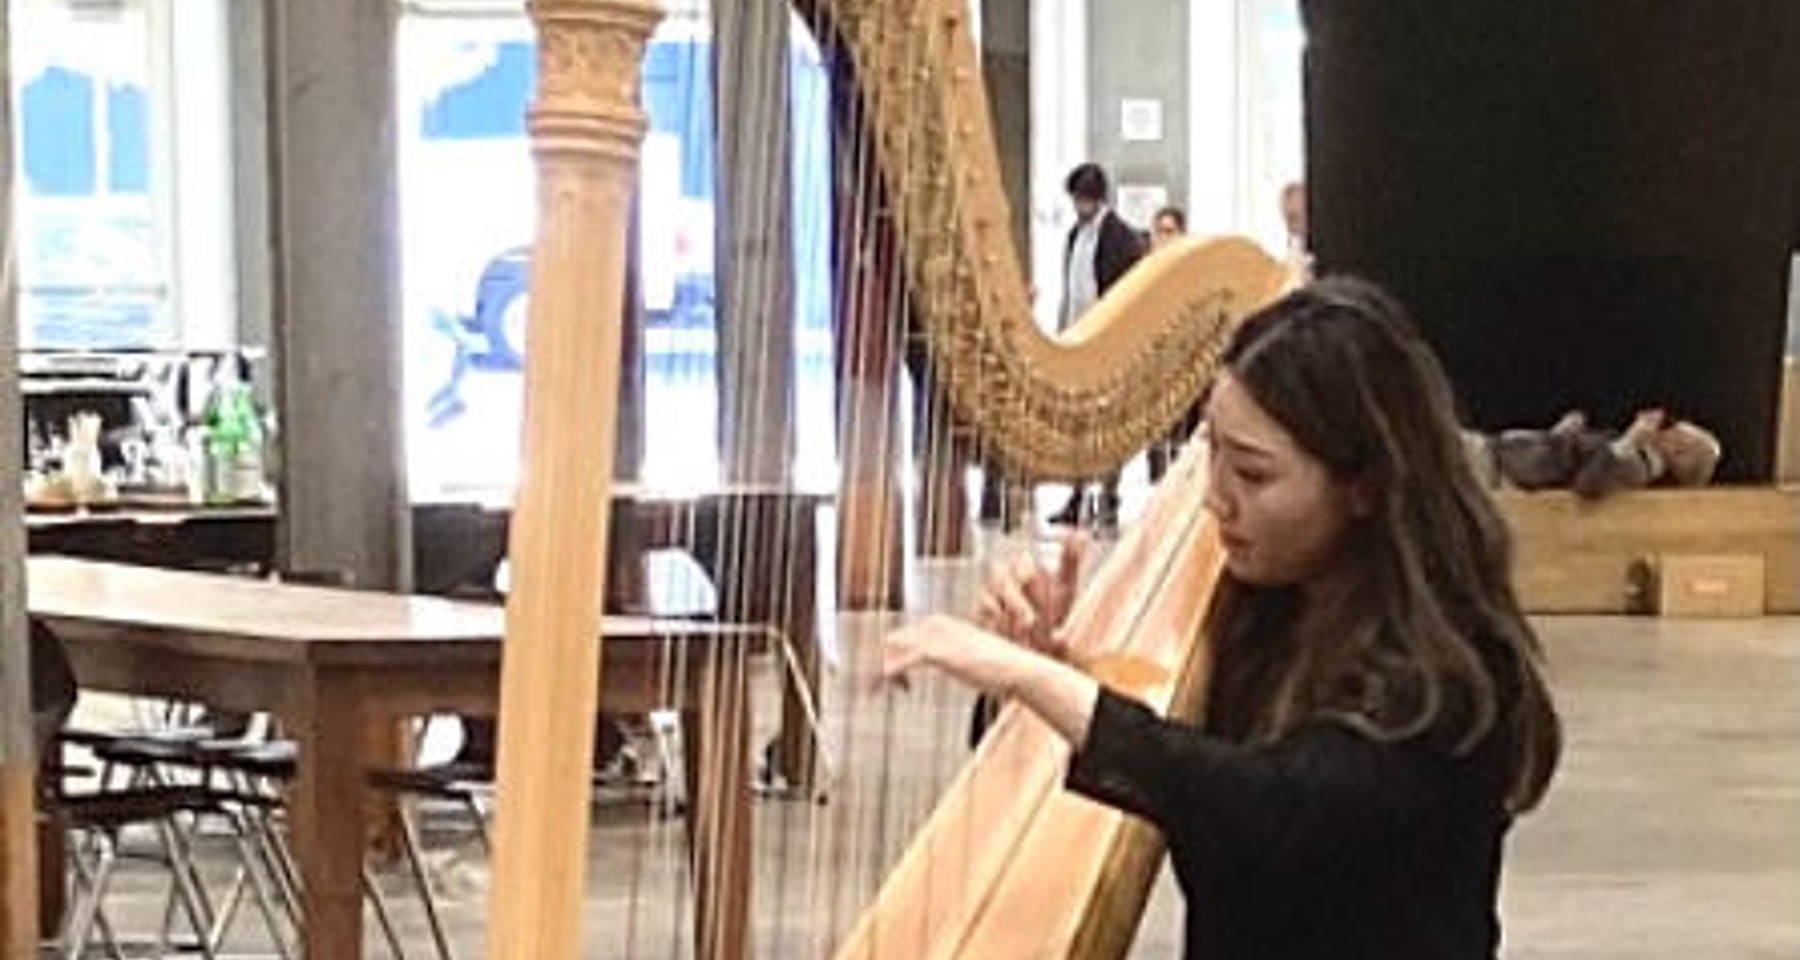  Summer Afternoon Delight: A Harp Concert at the Glen Park Public Library